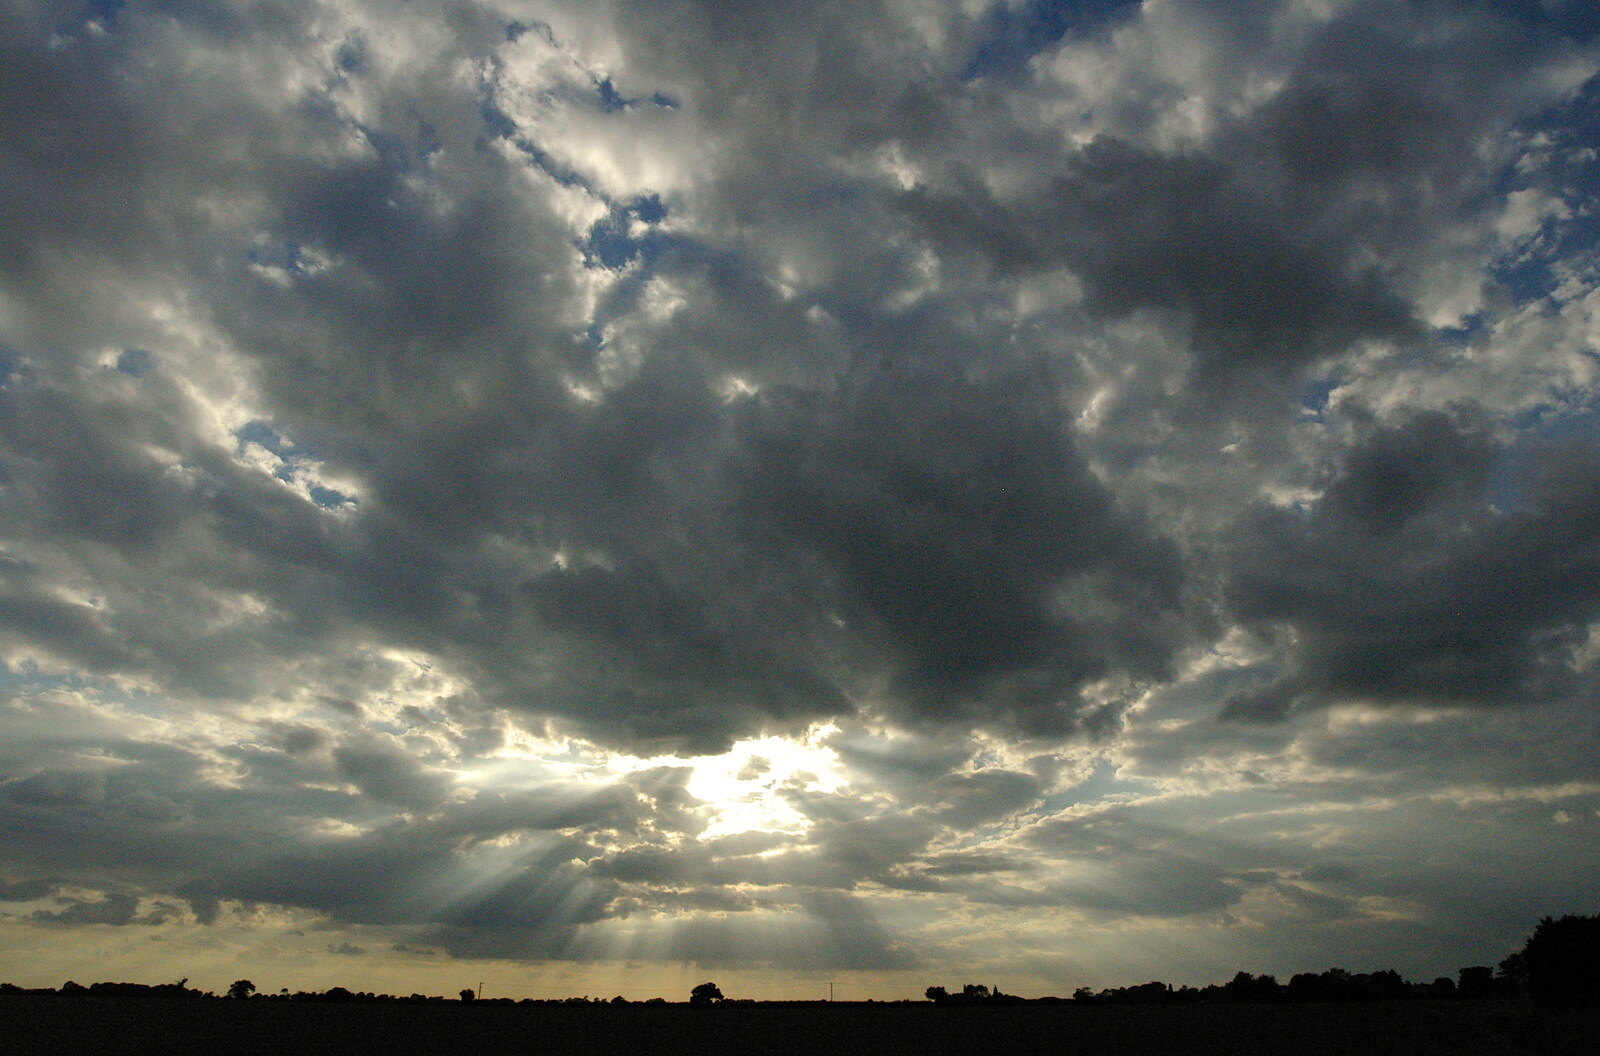 Crepuscular rays on the way to Banham from The BBS, and the Big Skies of East Anglia, Diss and Hunston, Norfolk and Suffolk - 6th August 2005